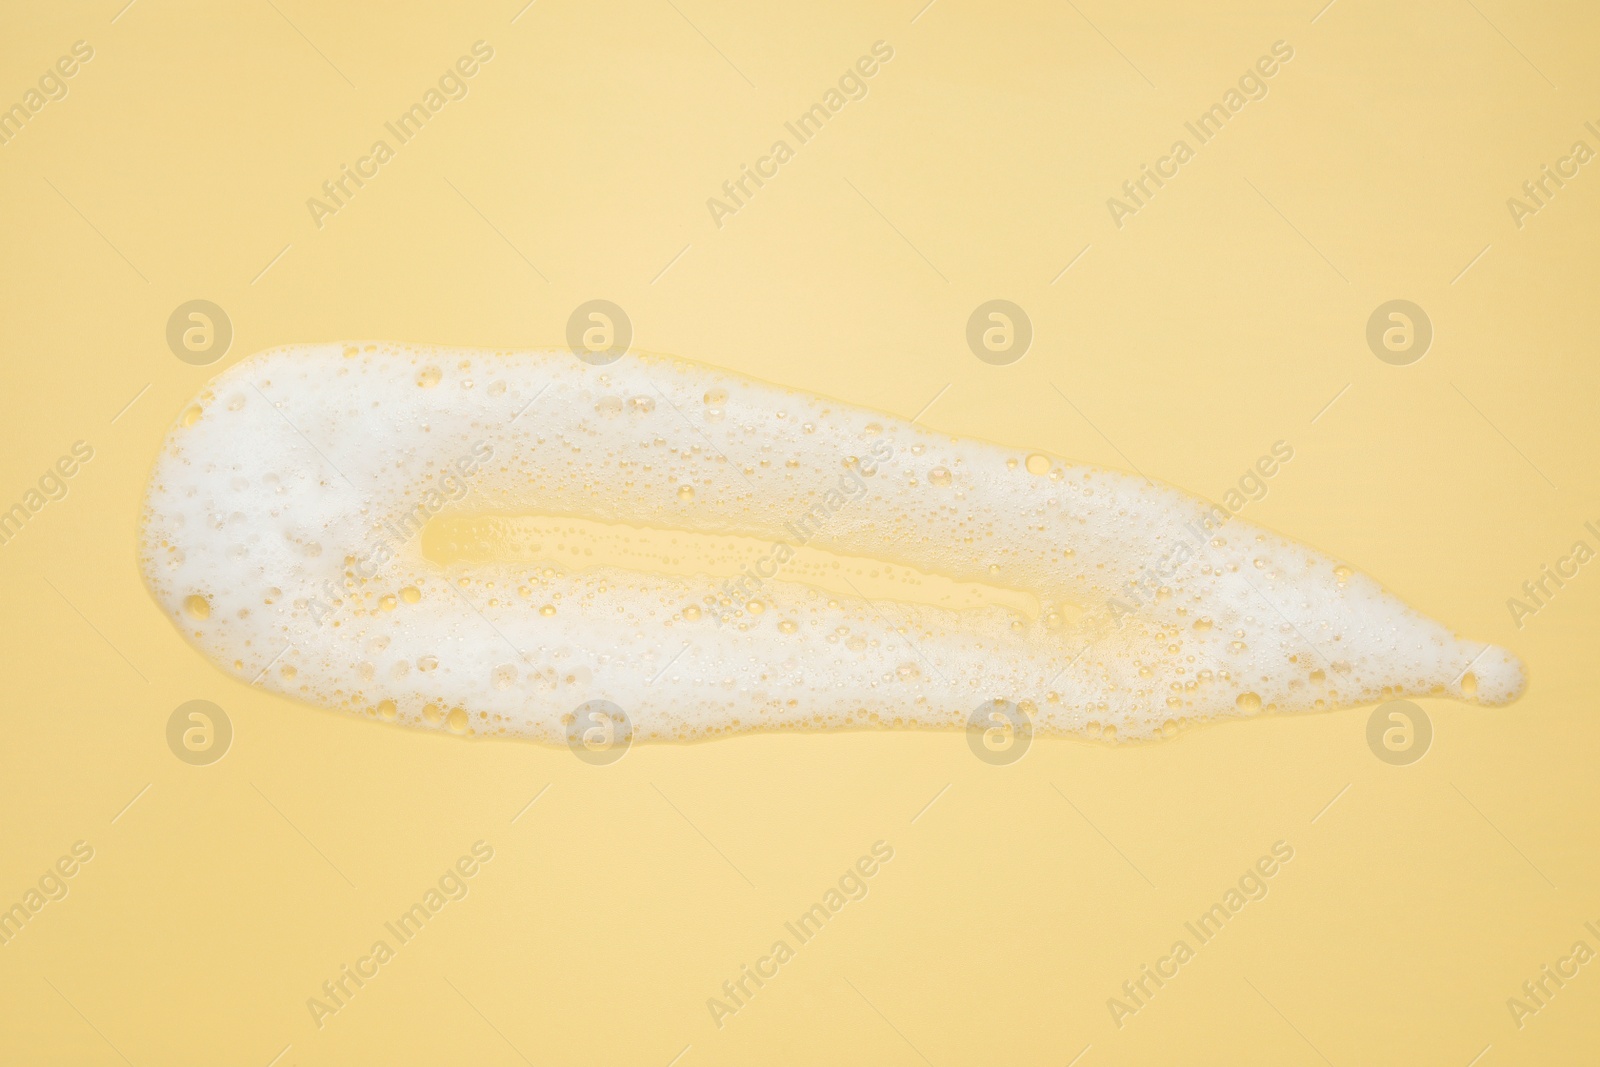 Photo of Smudge of white washing foam on yellow background, top view